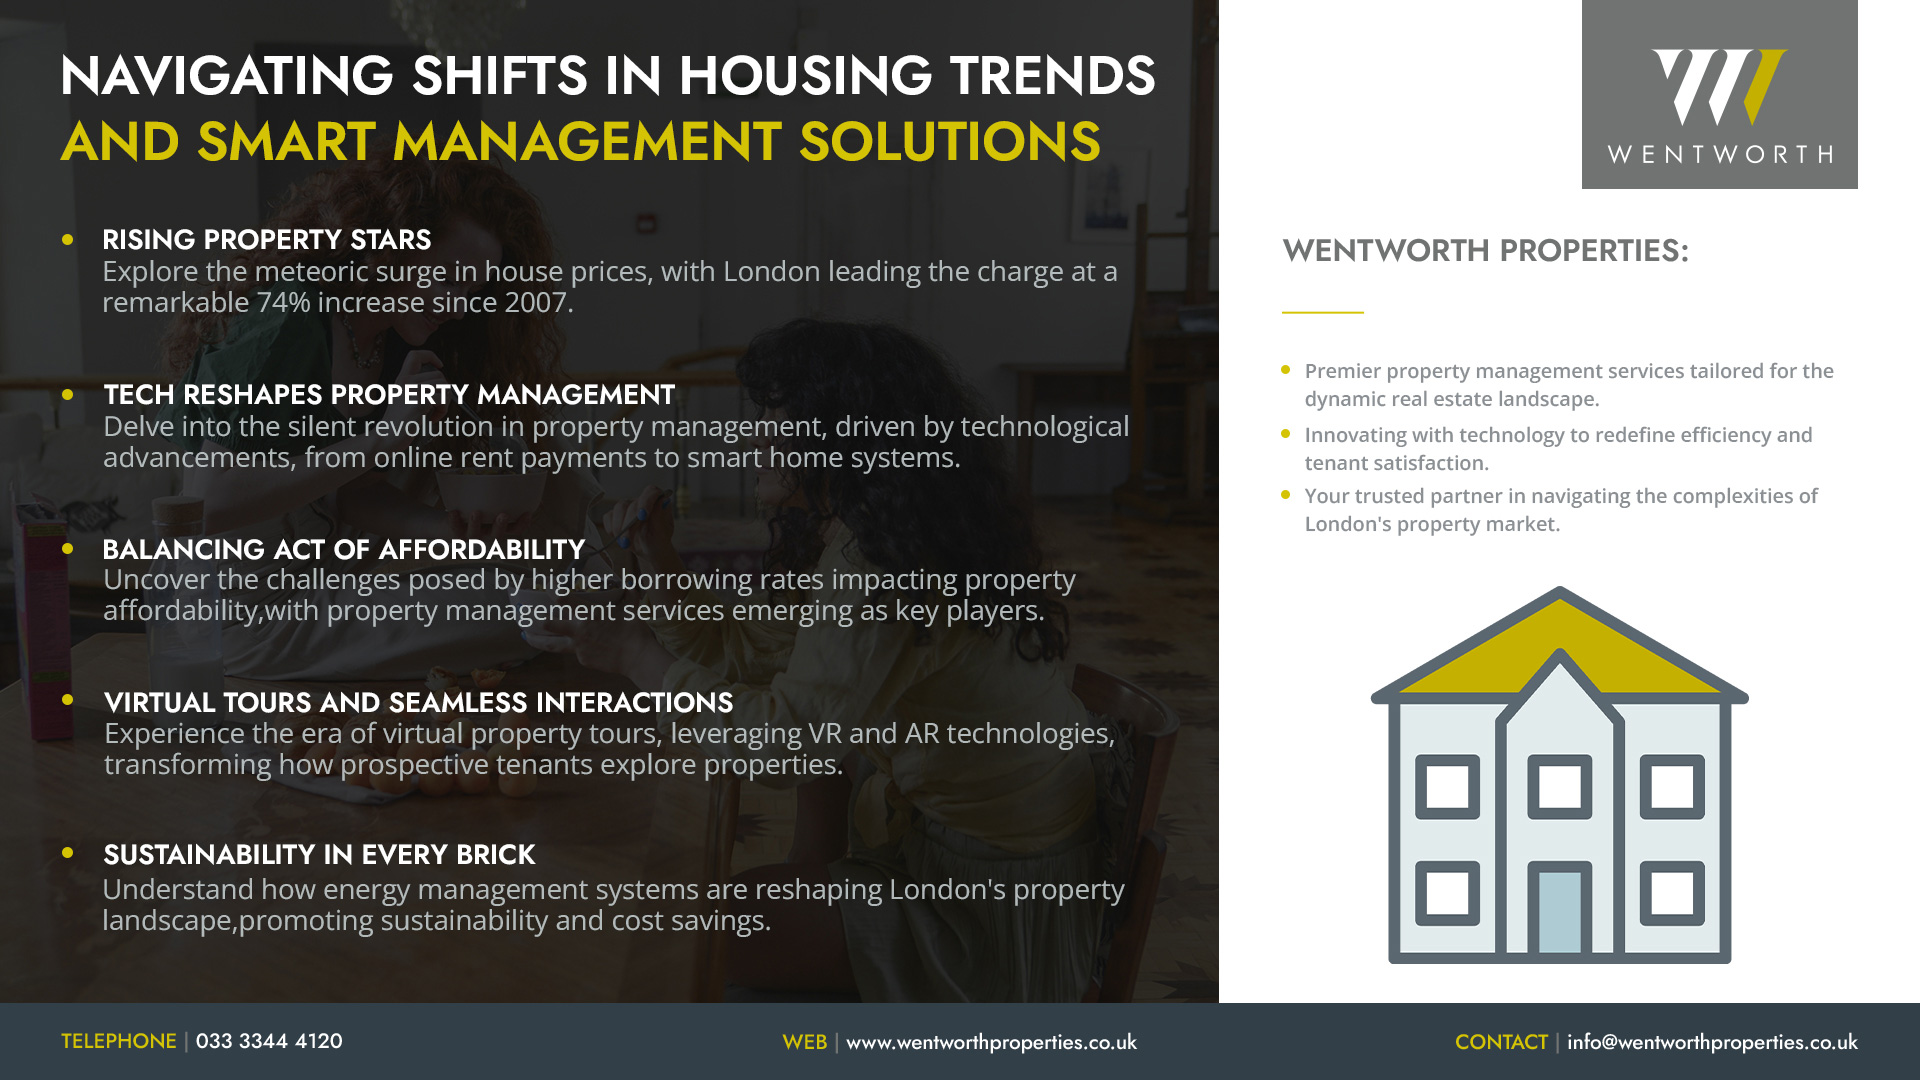 information about navigating shifts in house trends and smart management solutions